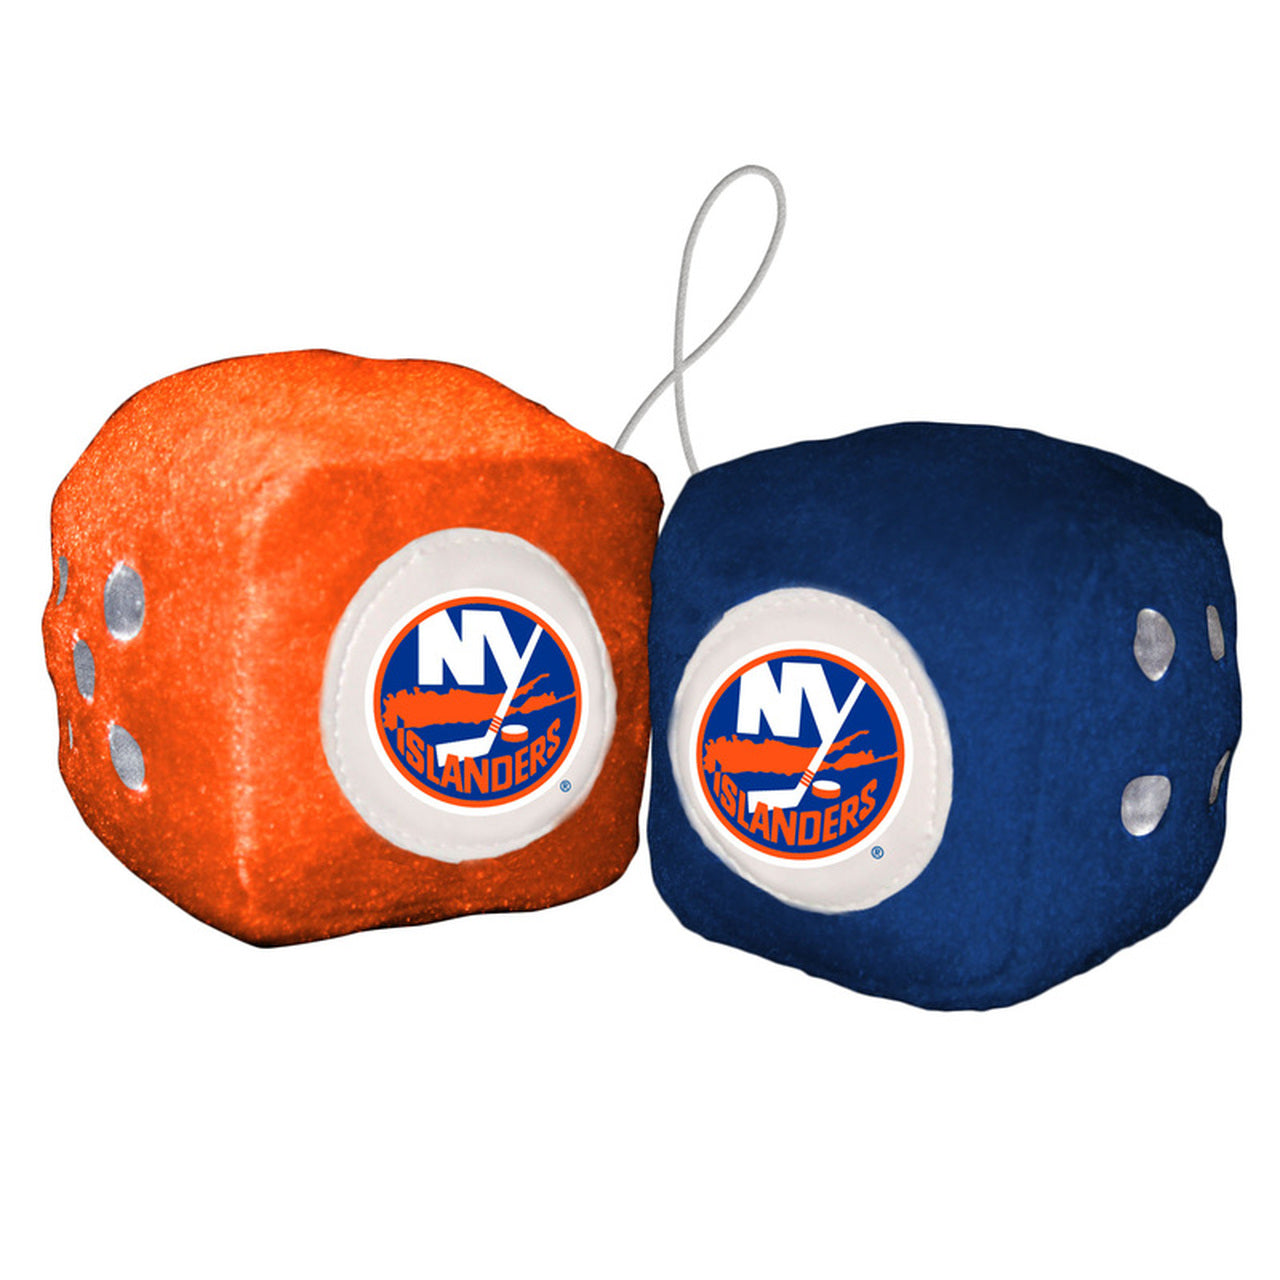 New York Islanders NHL Fuzzy Dice - 3" cubes in team colors and logo. High-quality plush, officially licensed by the NHL.